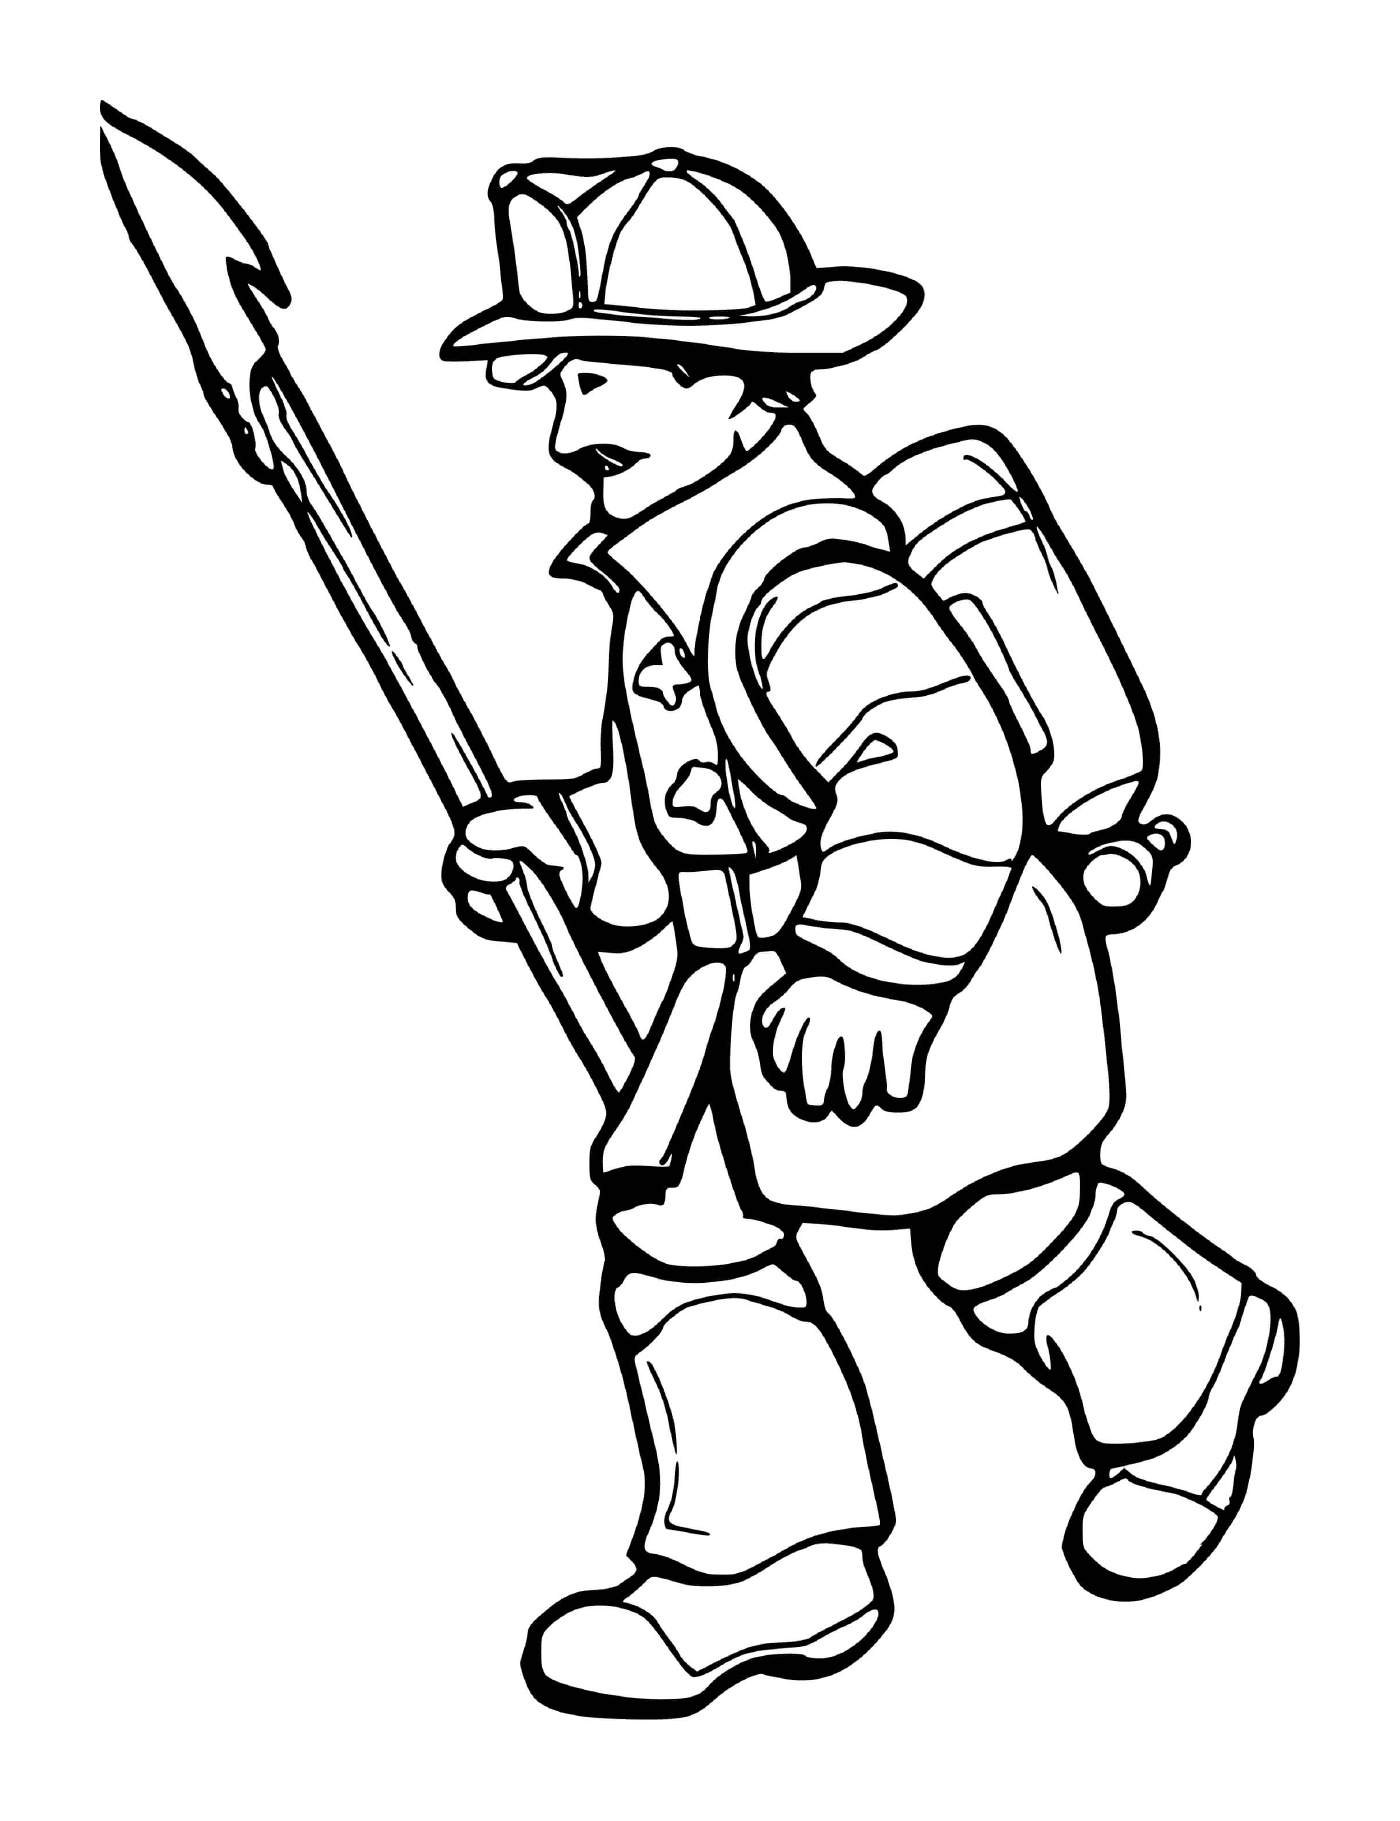  Firefighter with oxygen bottle 